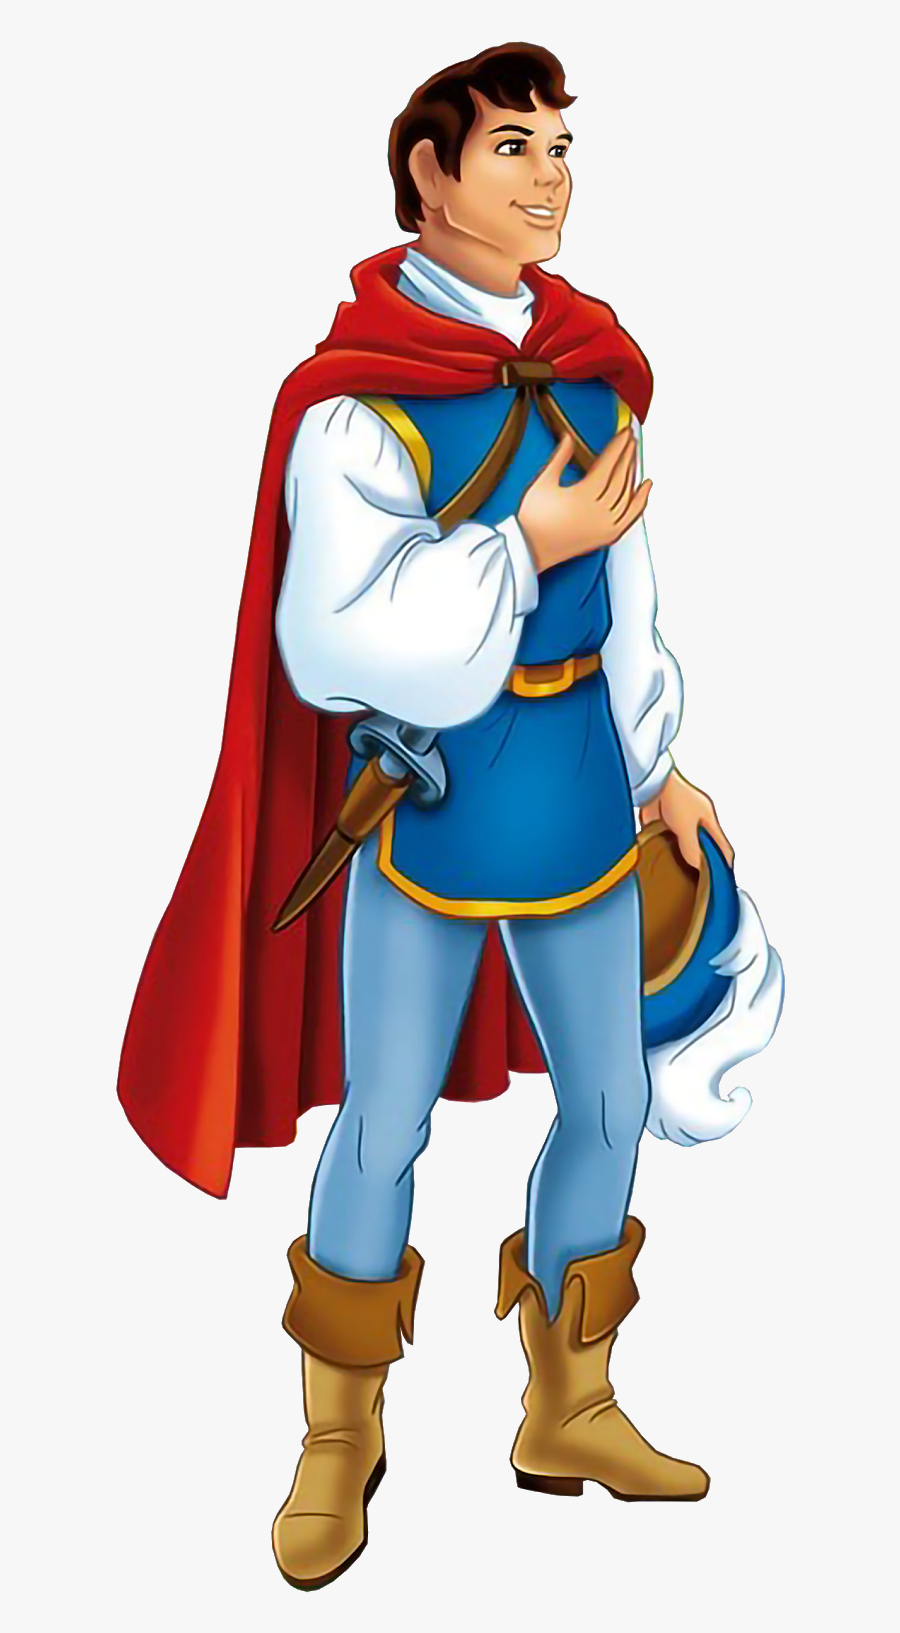 Snow White And The Seven Dwarfs Prince Charming Pinocchio - Snow White The Prince Png, Transparent Clipart